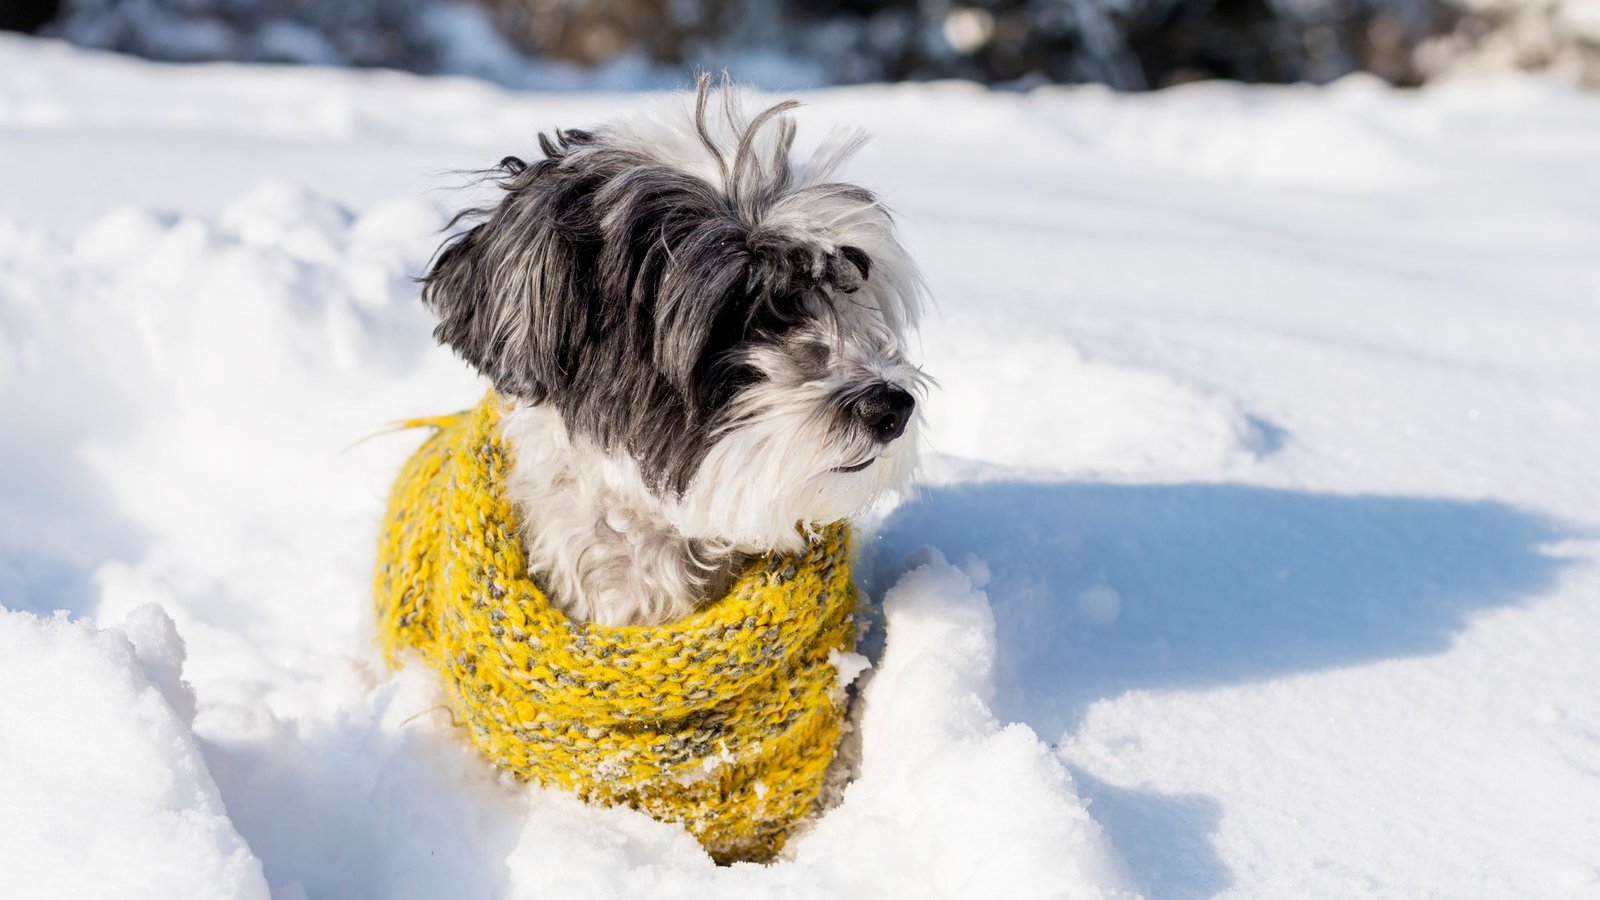 HOW KEEP YOUR DOG WARM IN WINTER